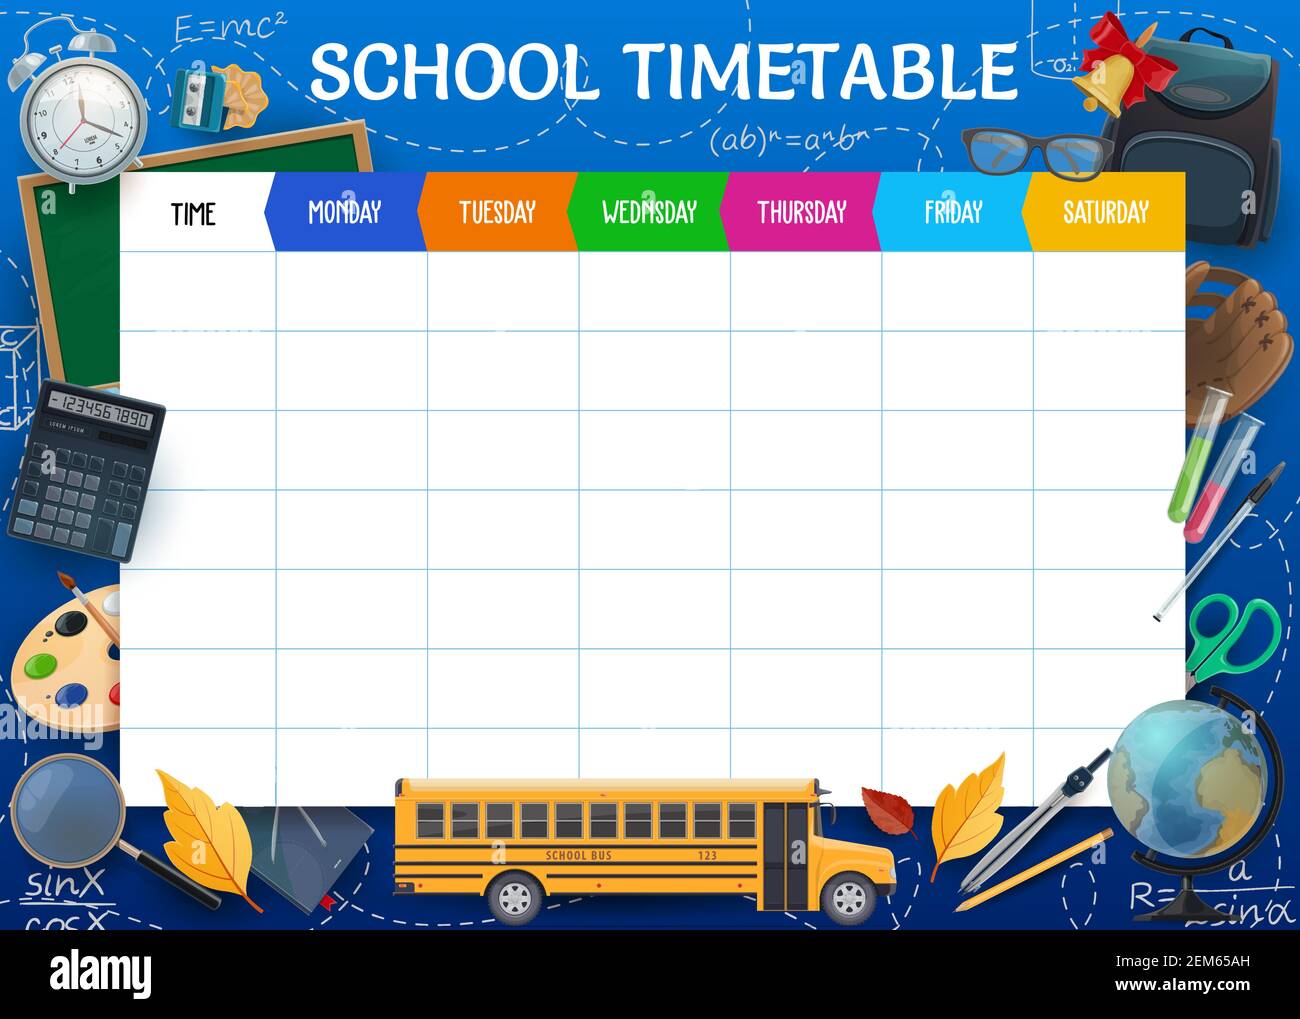 School timetable template flat table school elements sketch vectors stock  in format for free download 162 bytes